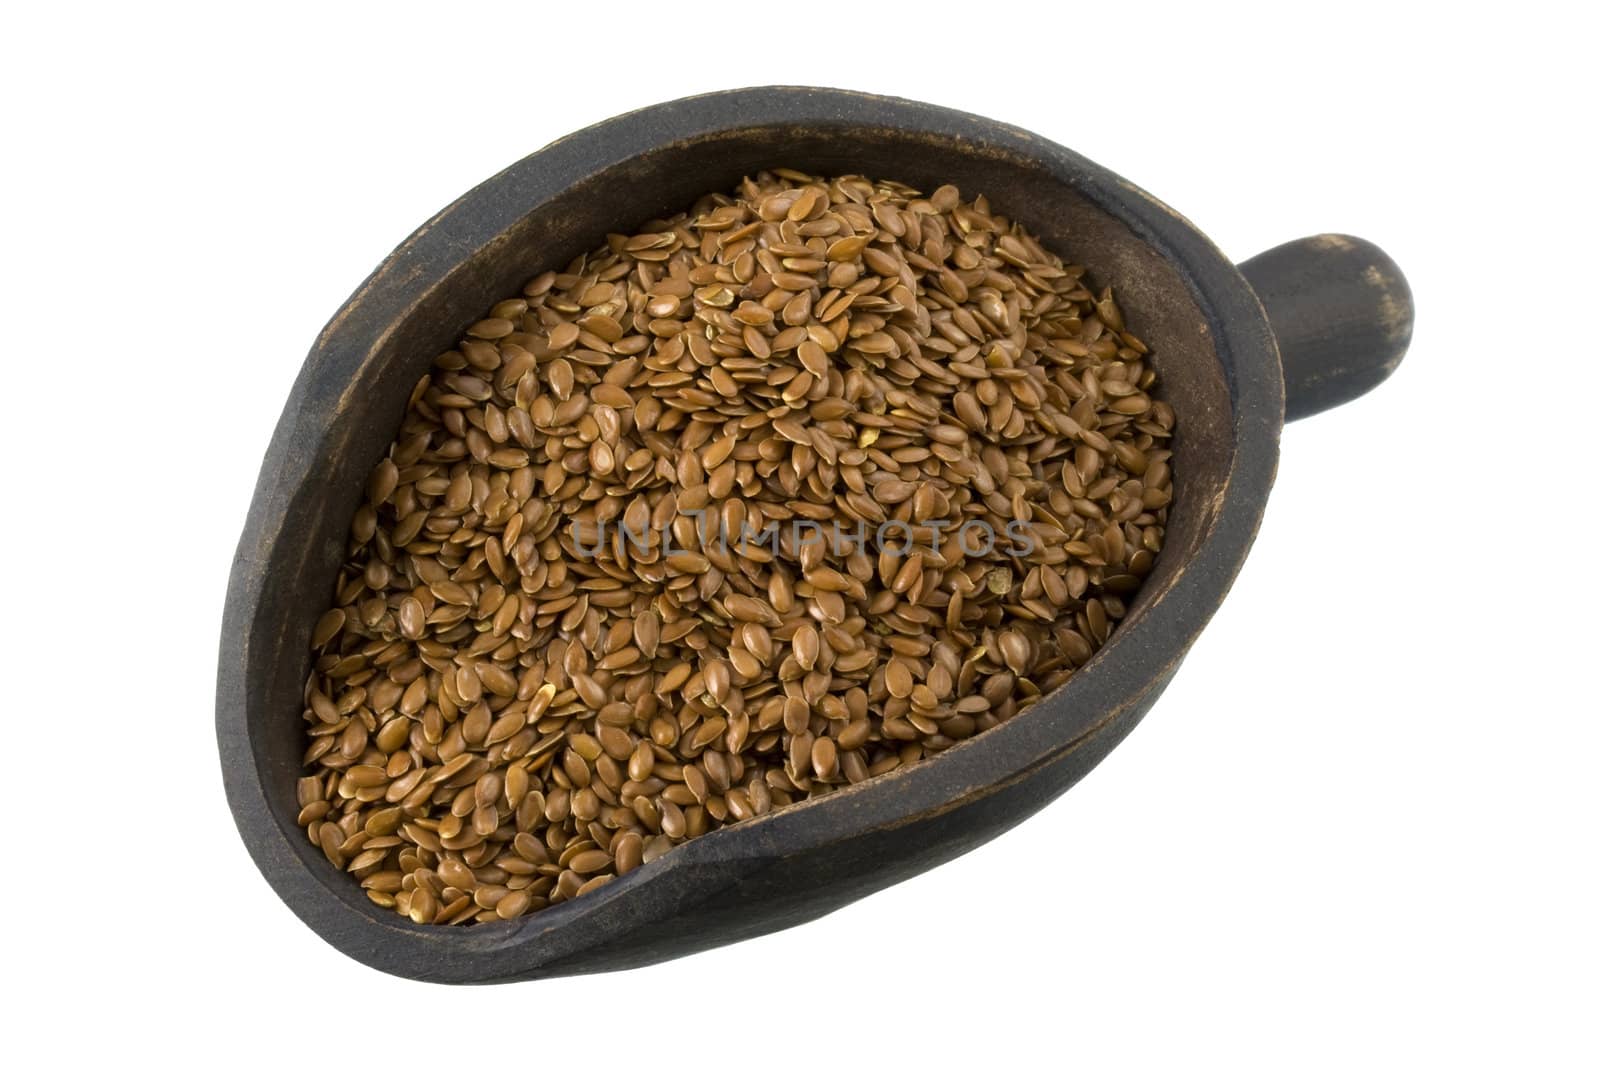 brown flx seeds on a primitive, wooden, dark painted scoop, isolated on white